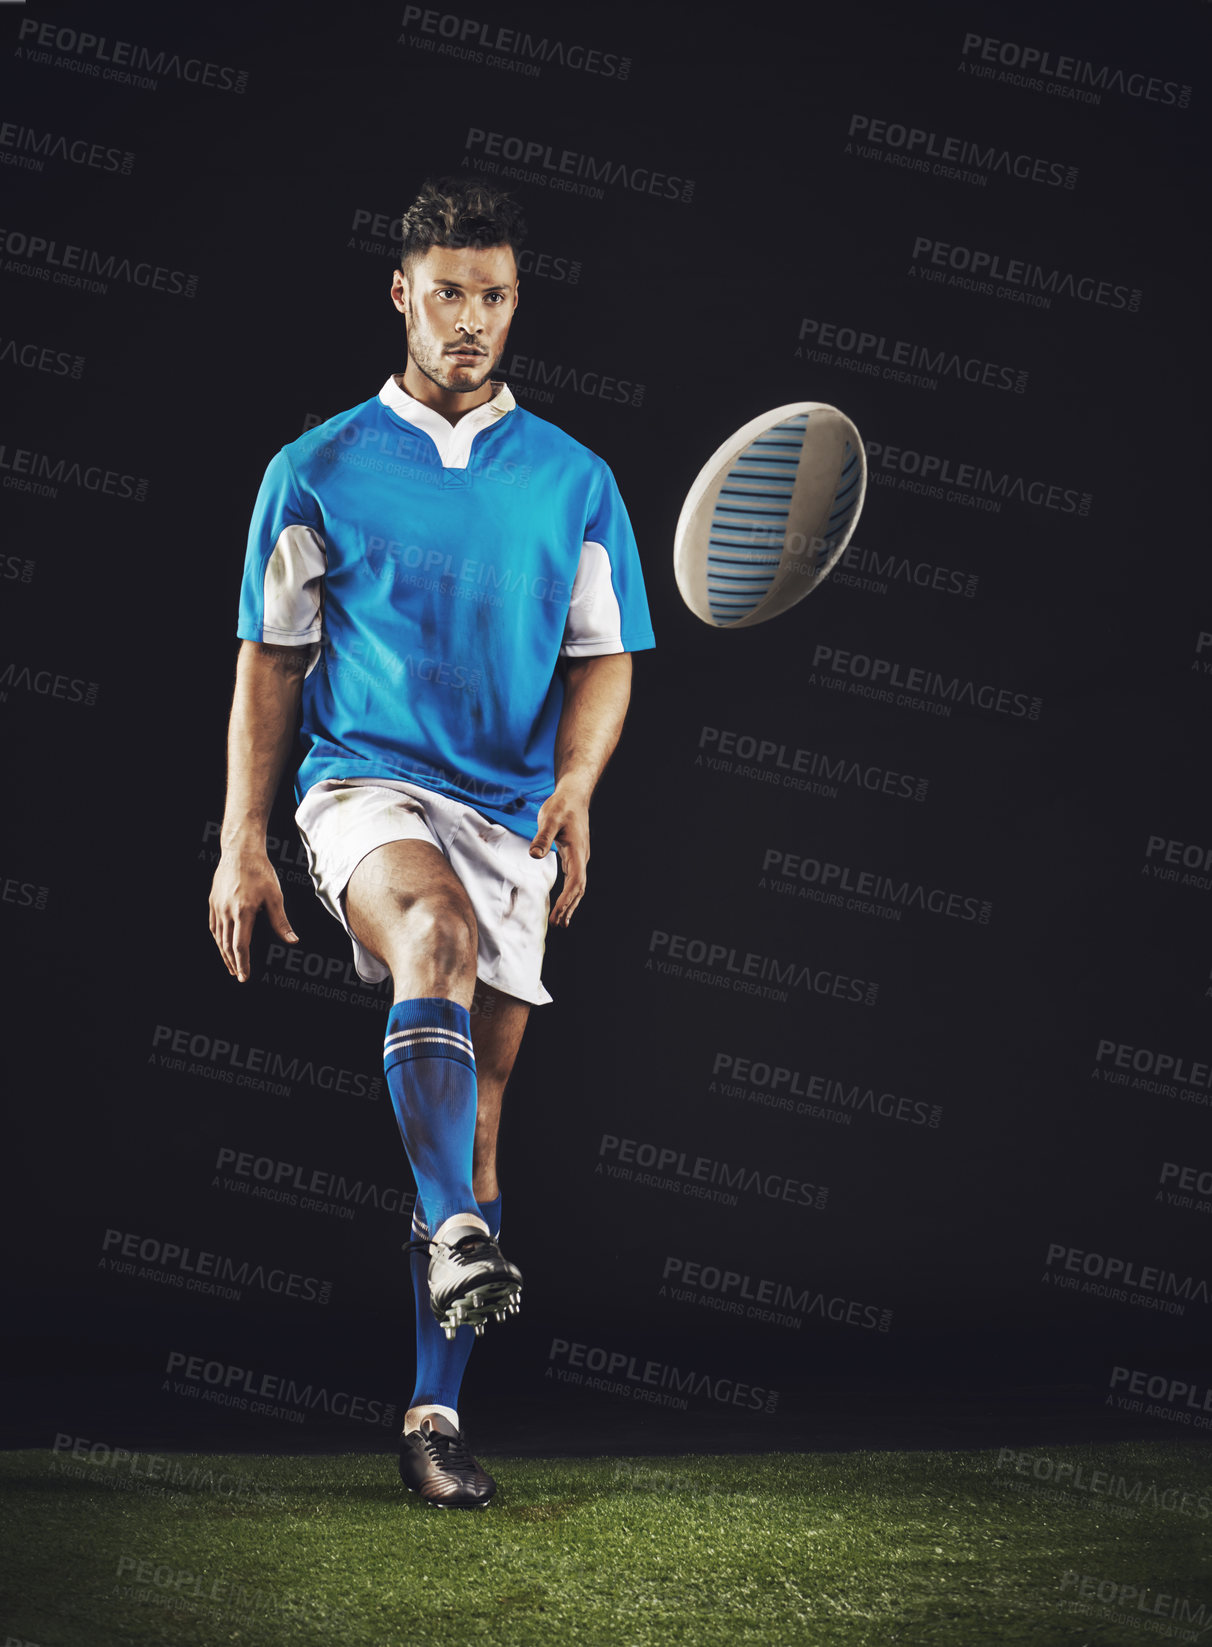 Buy stock photo Full length studio shot of a young rugby player on the field